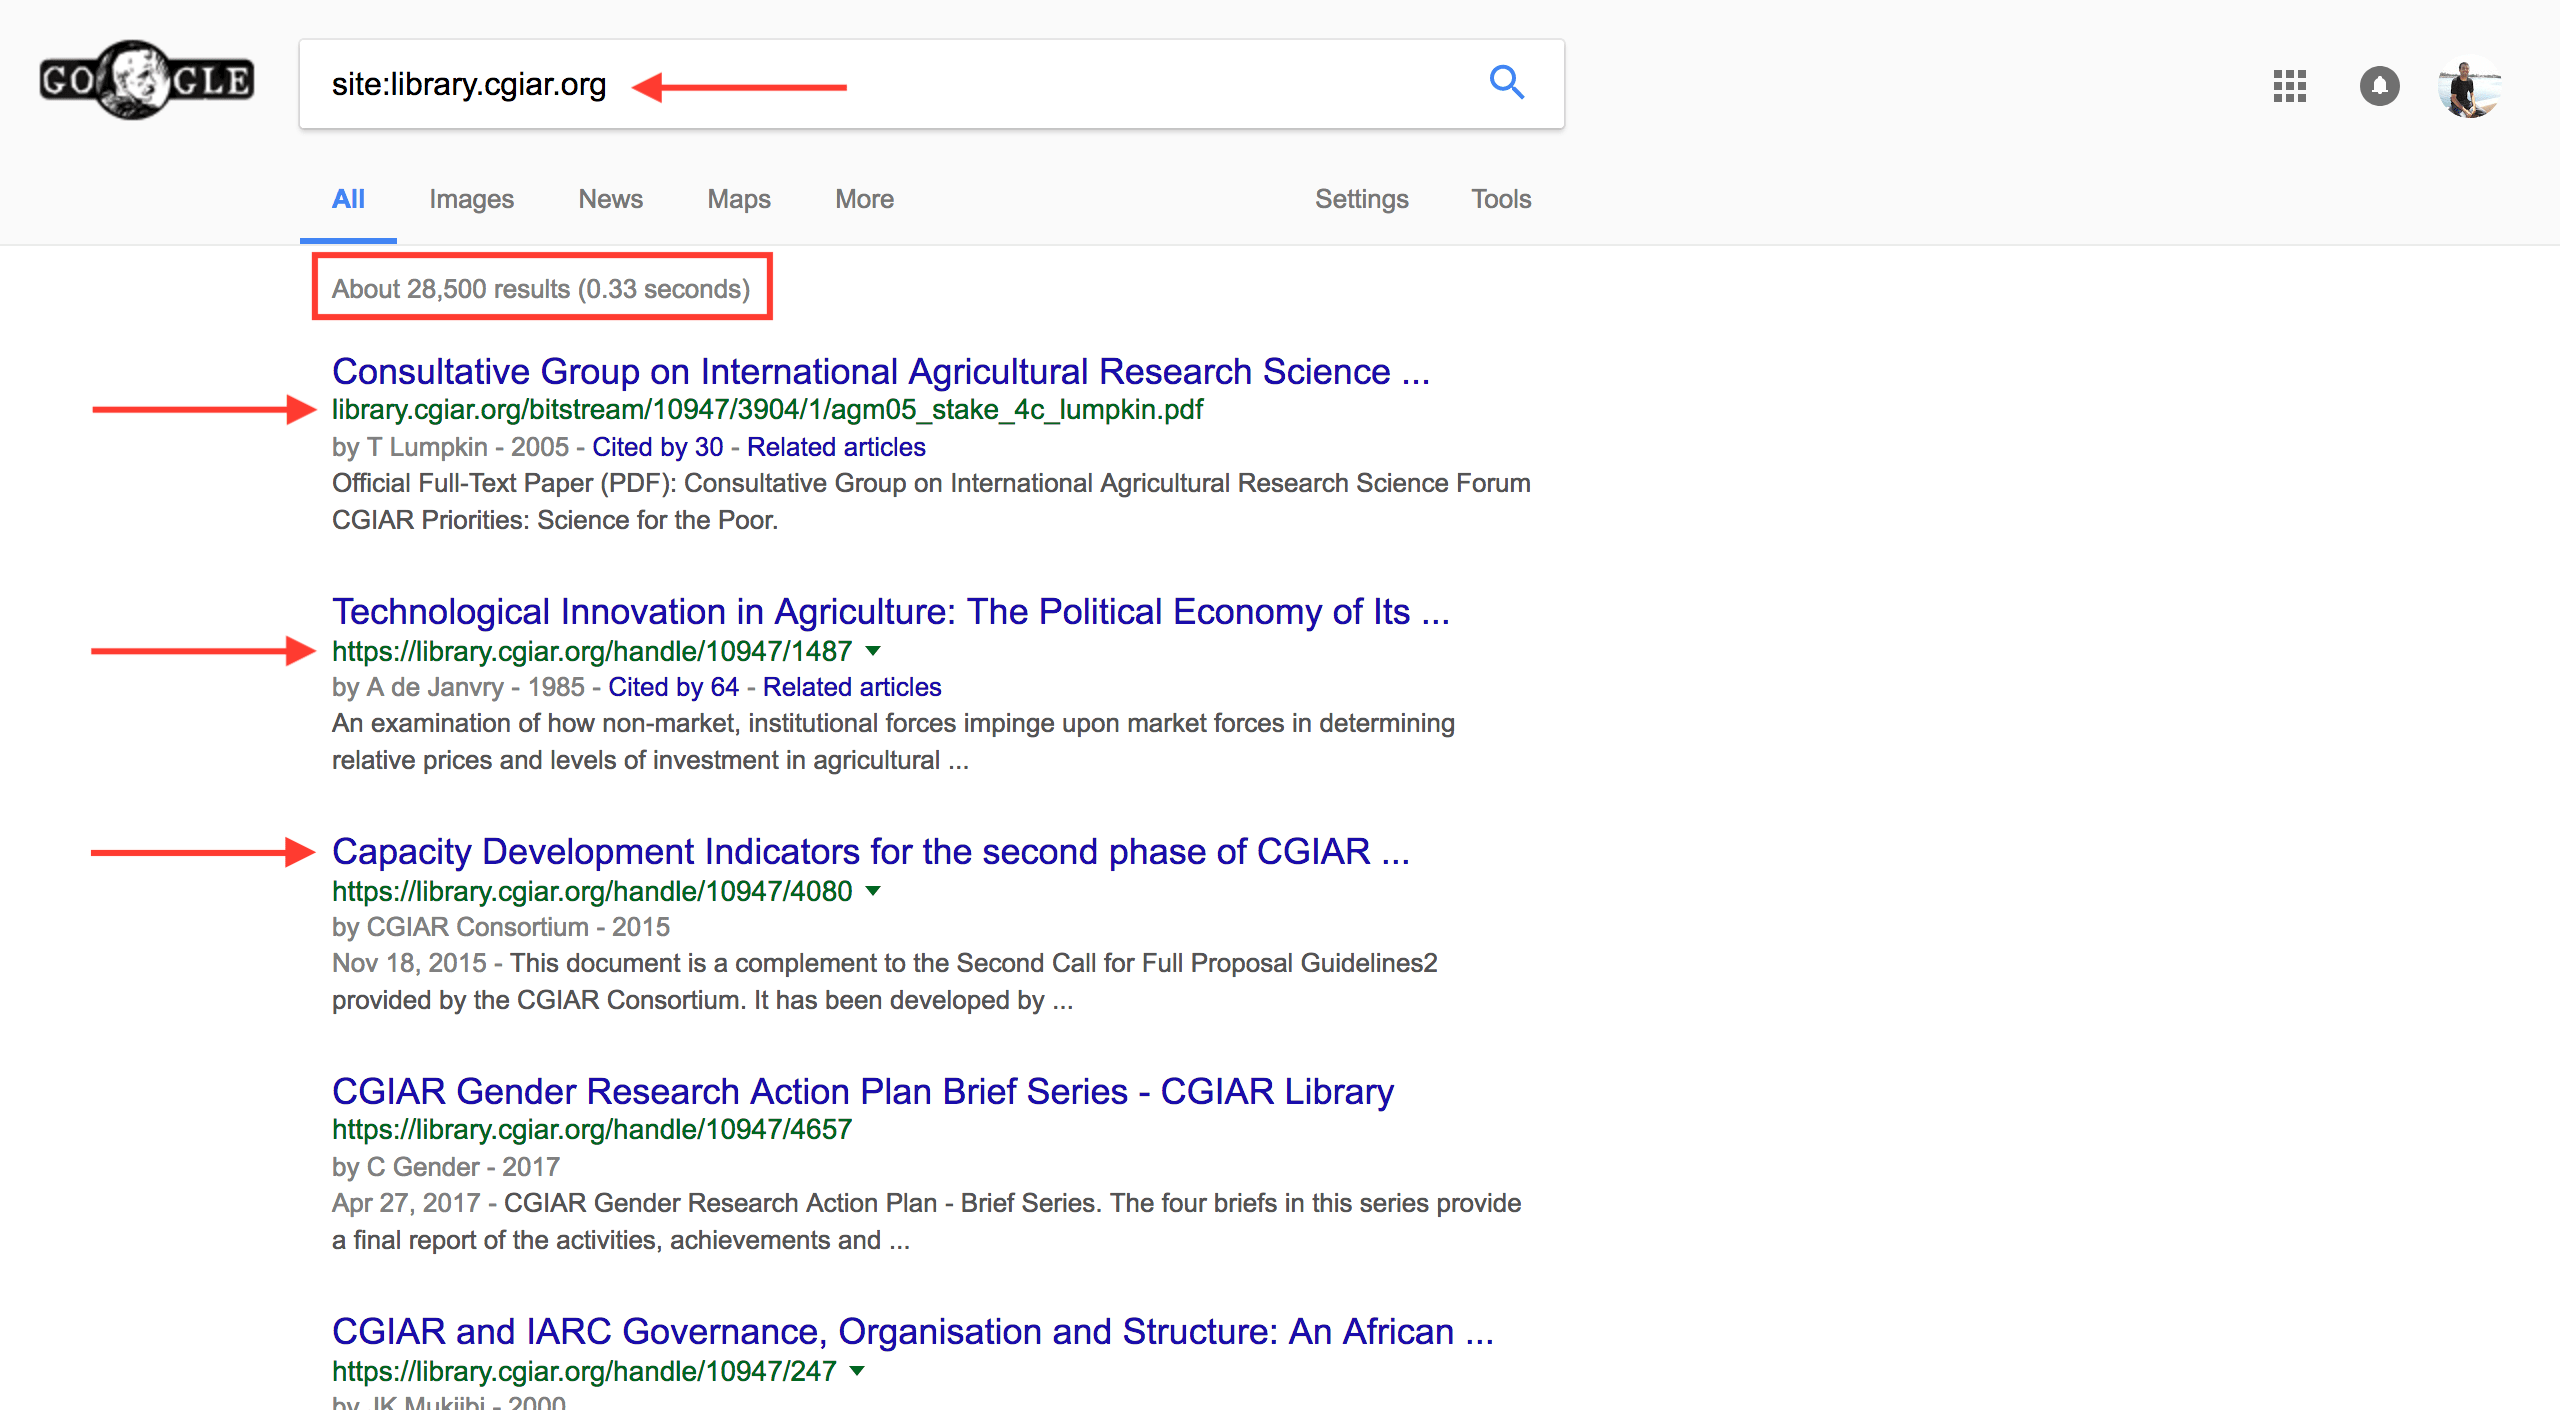 Google Search results